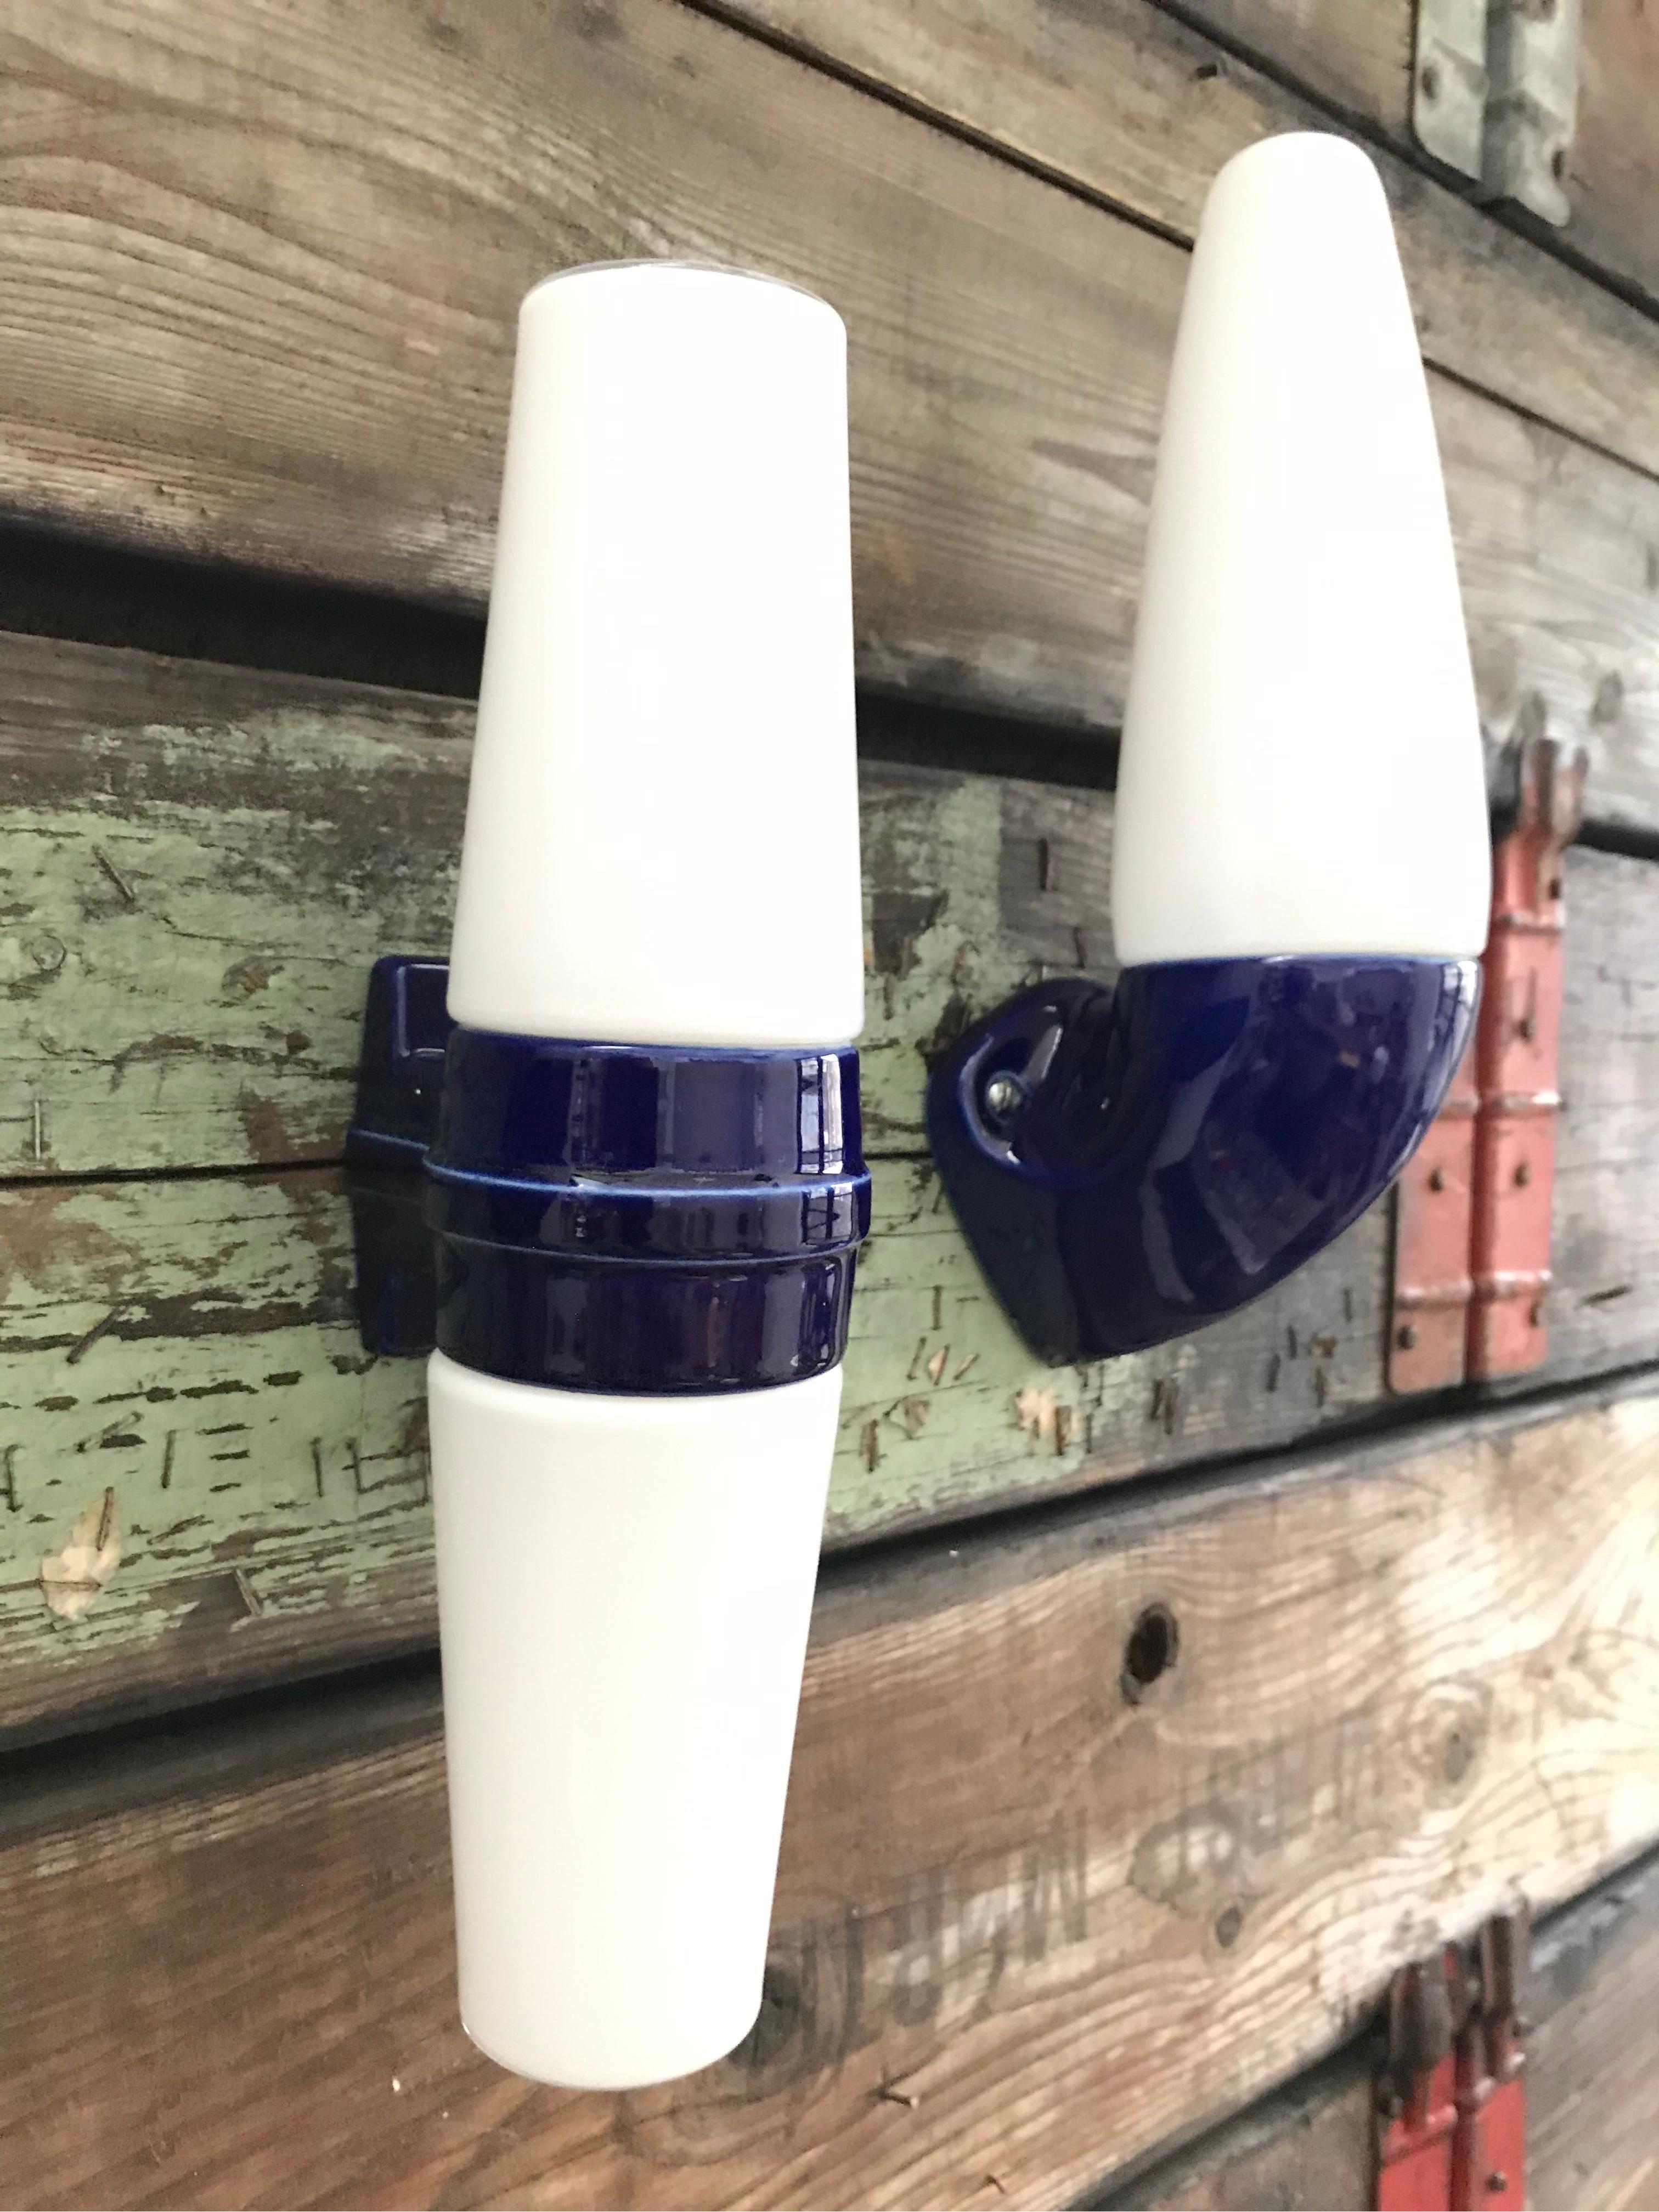 Hand-Crafted Vintage Ifö of Sweden Ceramic Bathroom Lamps with Opaline Shades from the 1960s